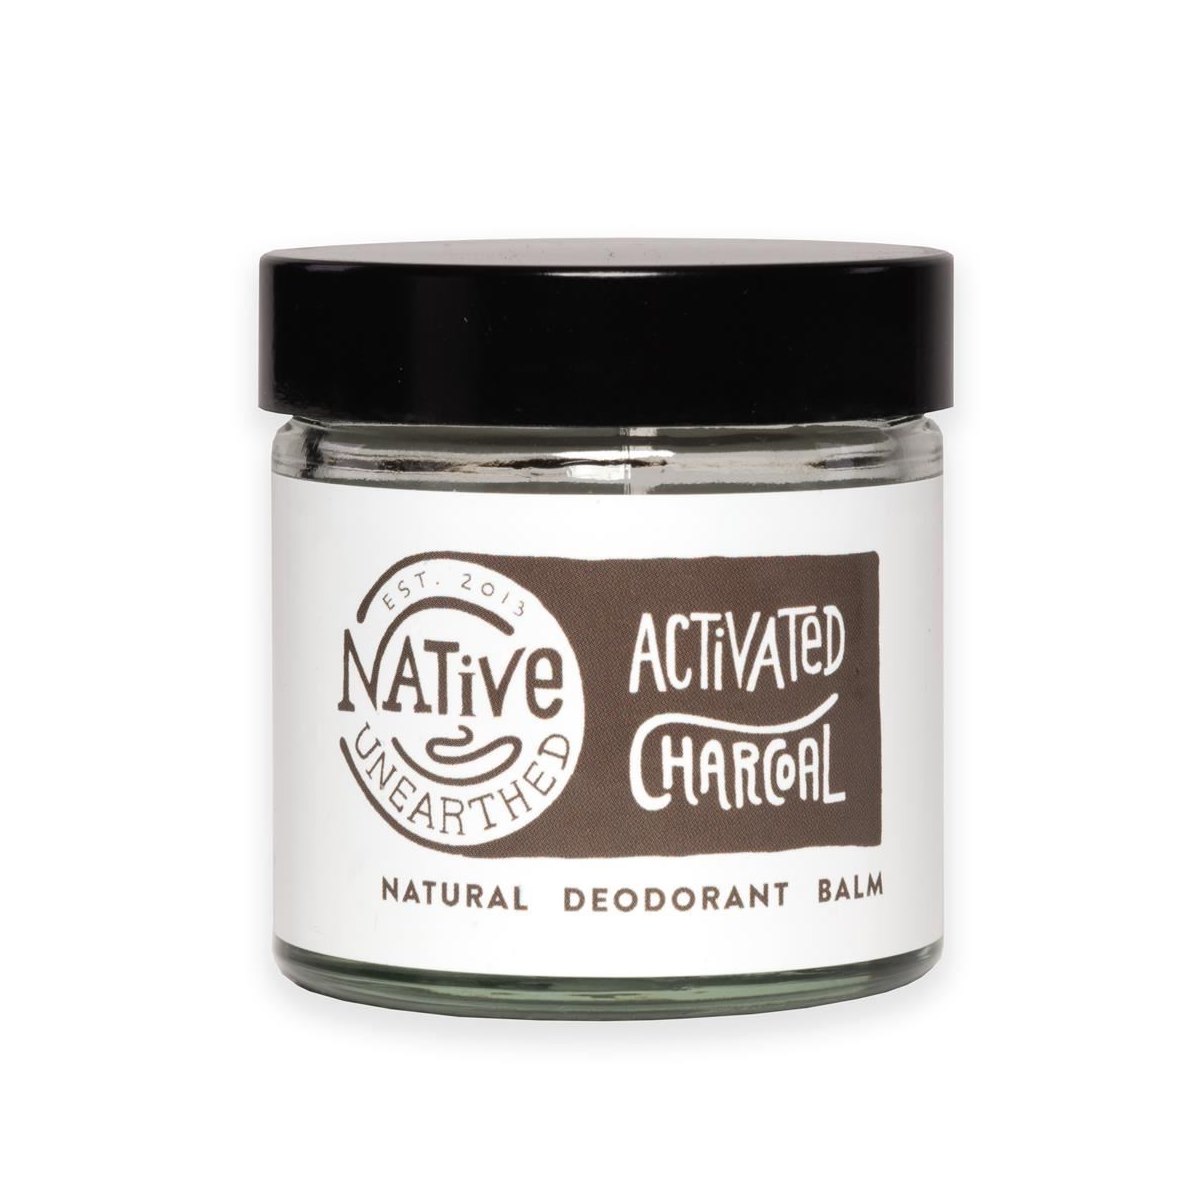 Native Unearthed Activated Charcoal Natural Deodorant Balm 60g